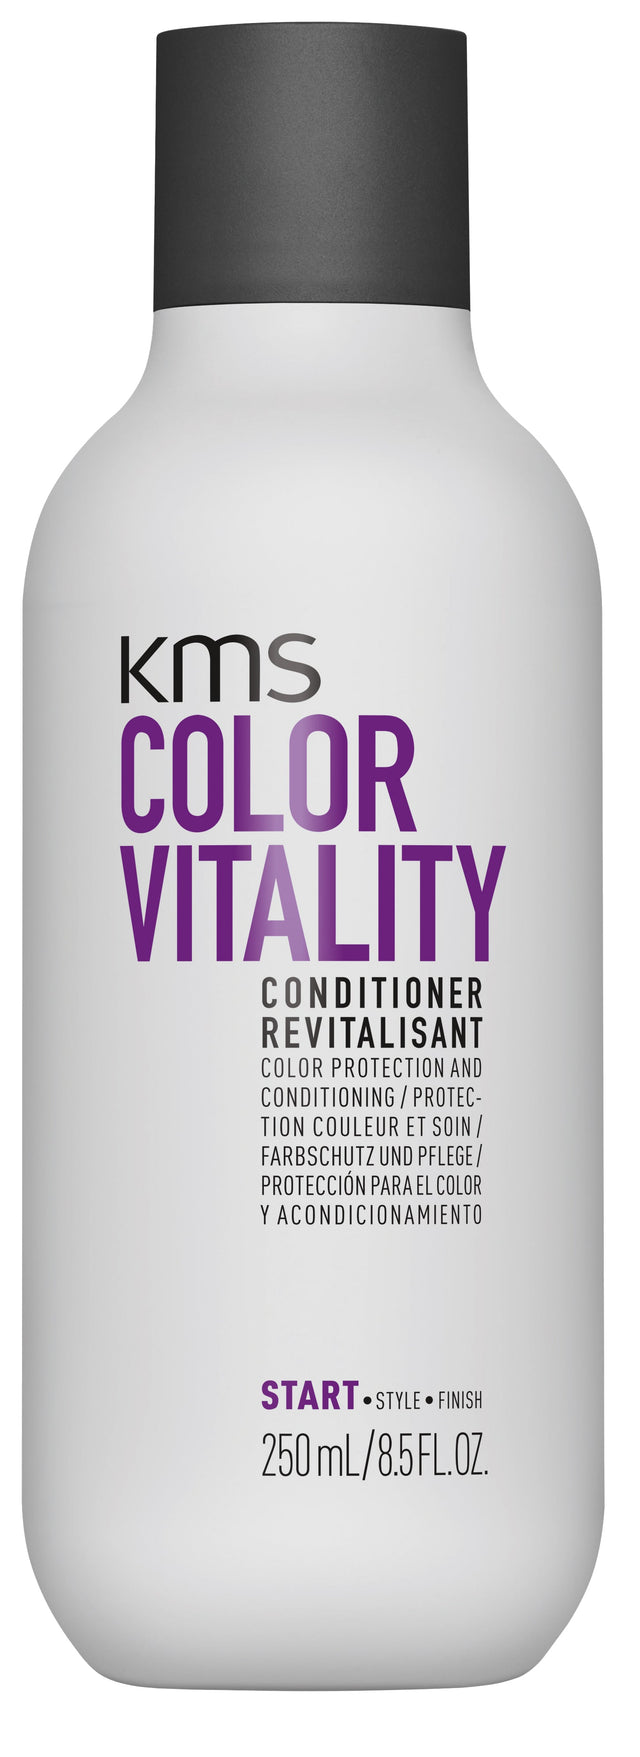 ColorVitality Conditioner Image thumbnail